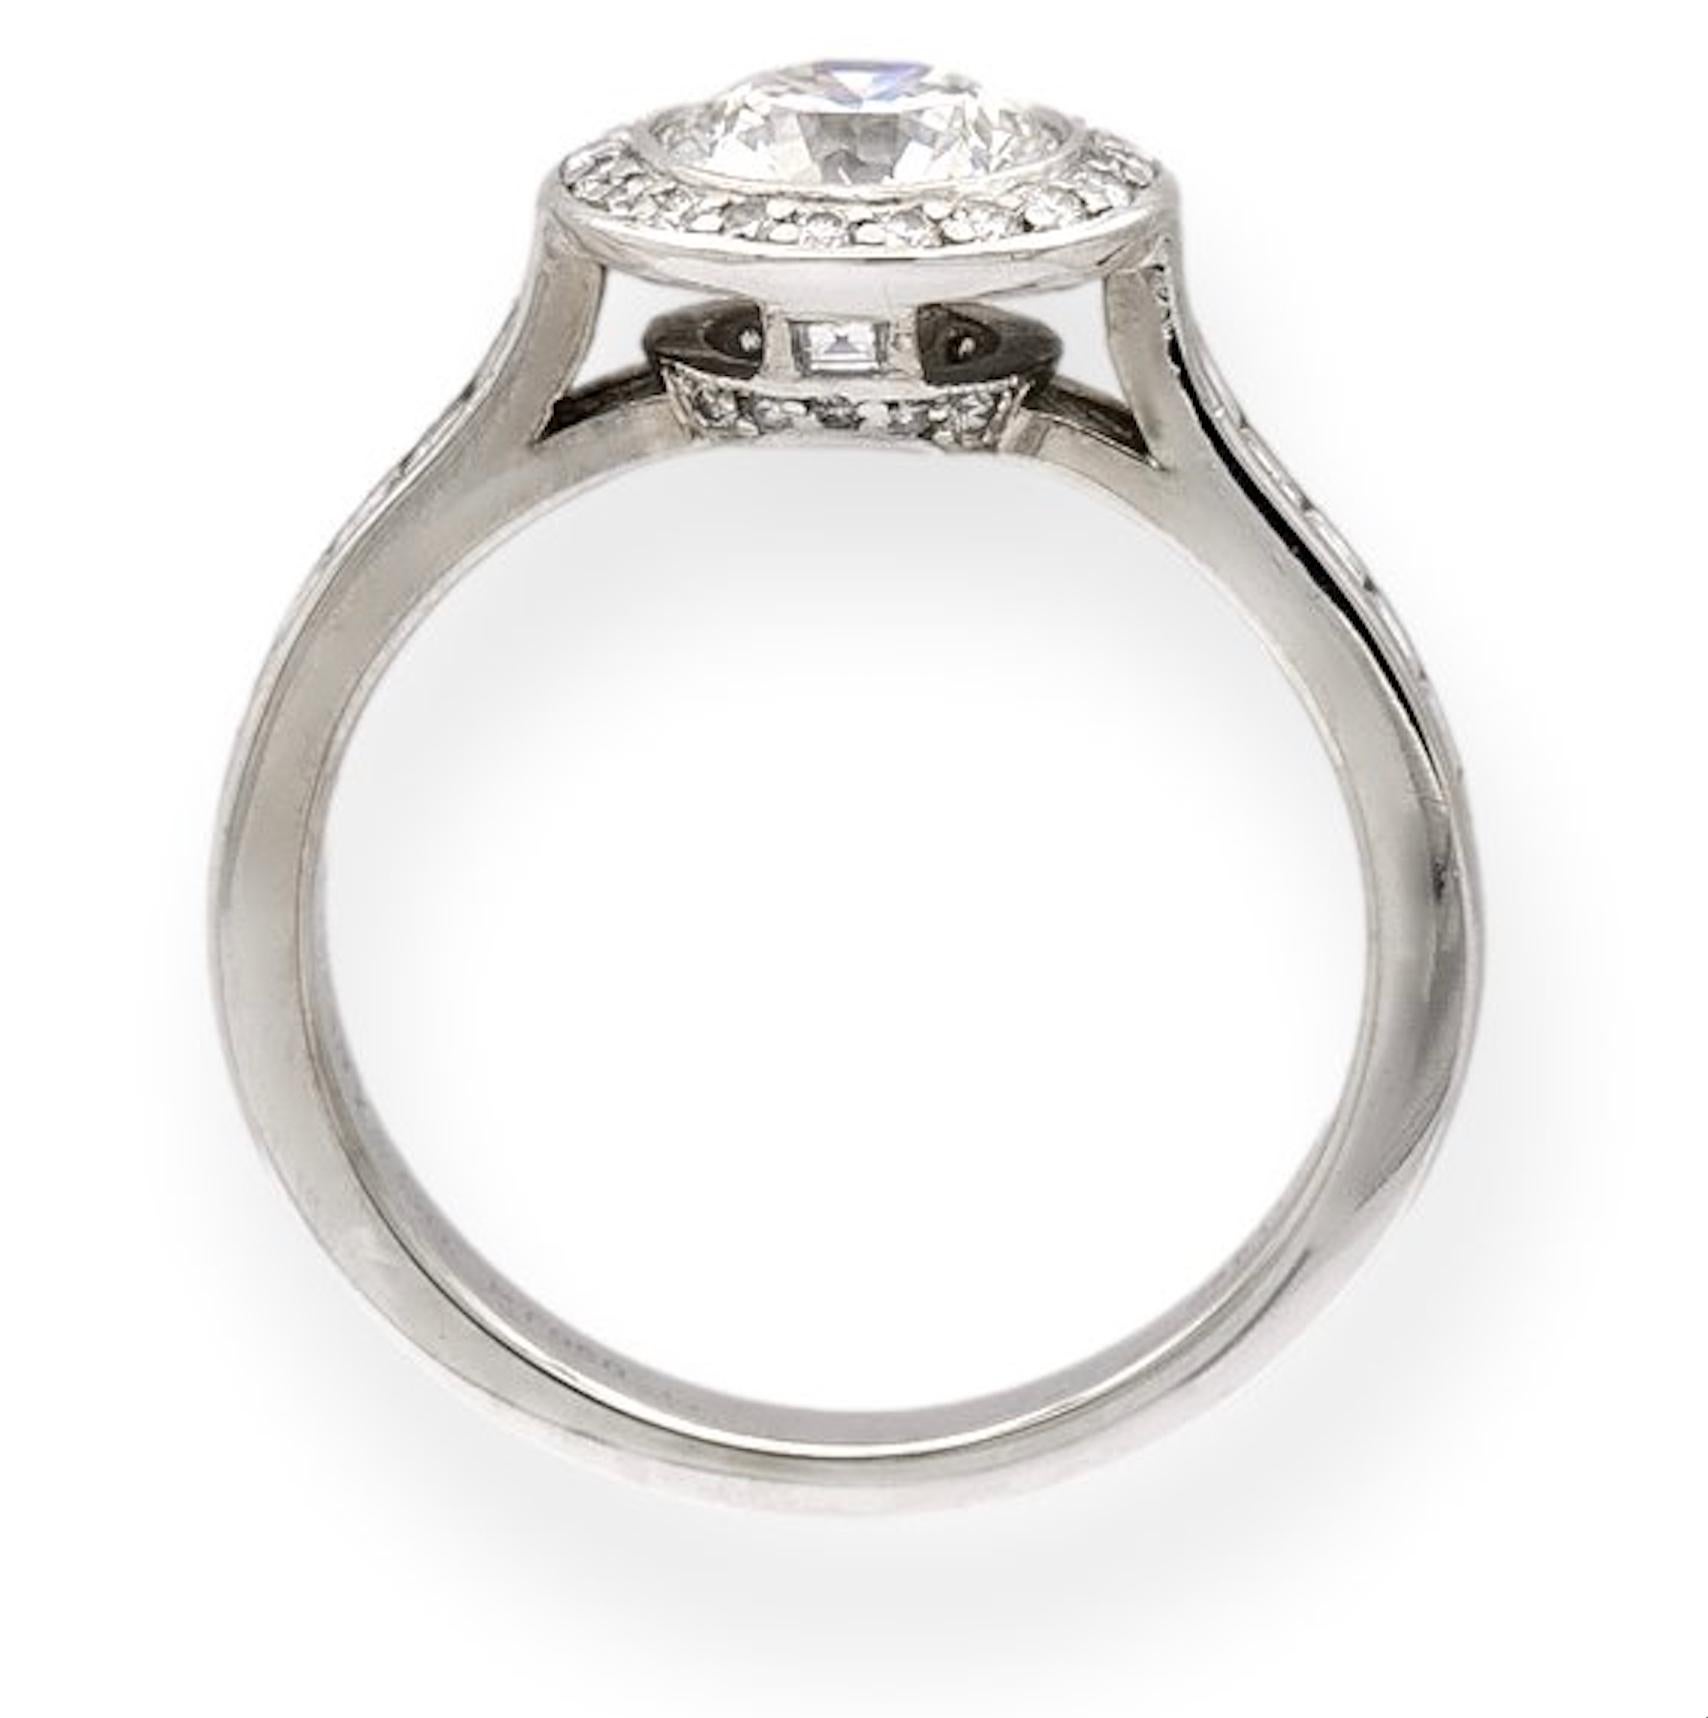 Tiffany & Co. engagement ring from the Embrace collection finely crafted in platinum featuring a round brilliant cut center diamond set in a bezel weighing 1.07 carats surrounded by a halo of channel set round brilliant cut diamonds and square